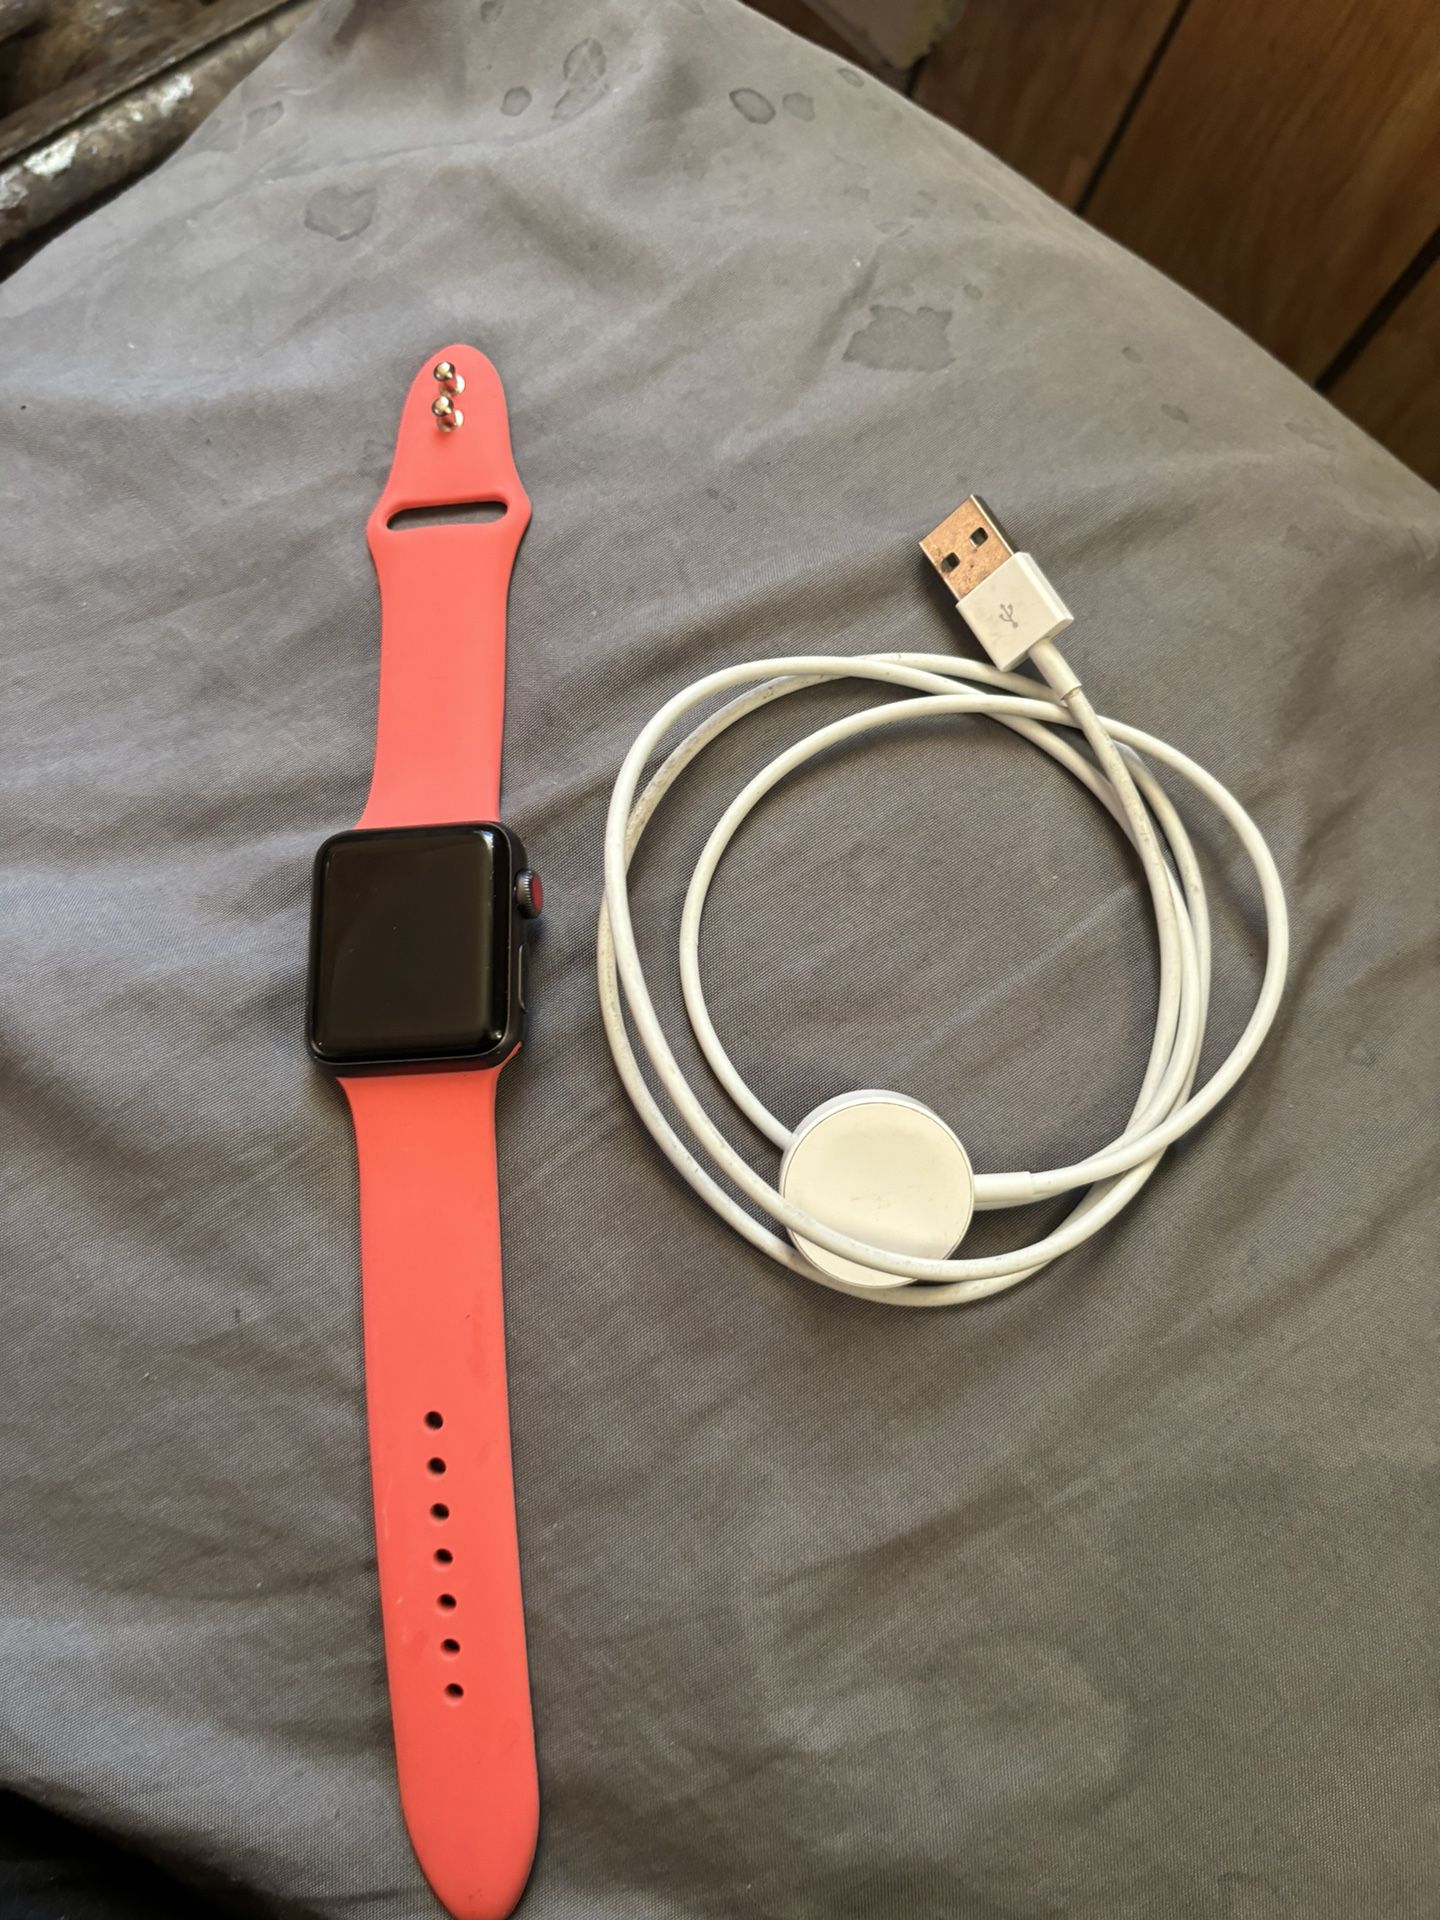 Used Apple Watch Series 3 38MM Space Gray - Aluminum Case 